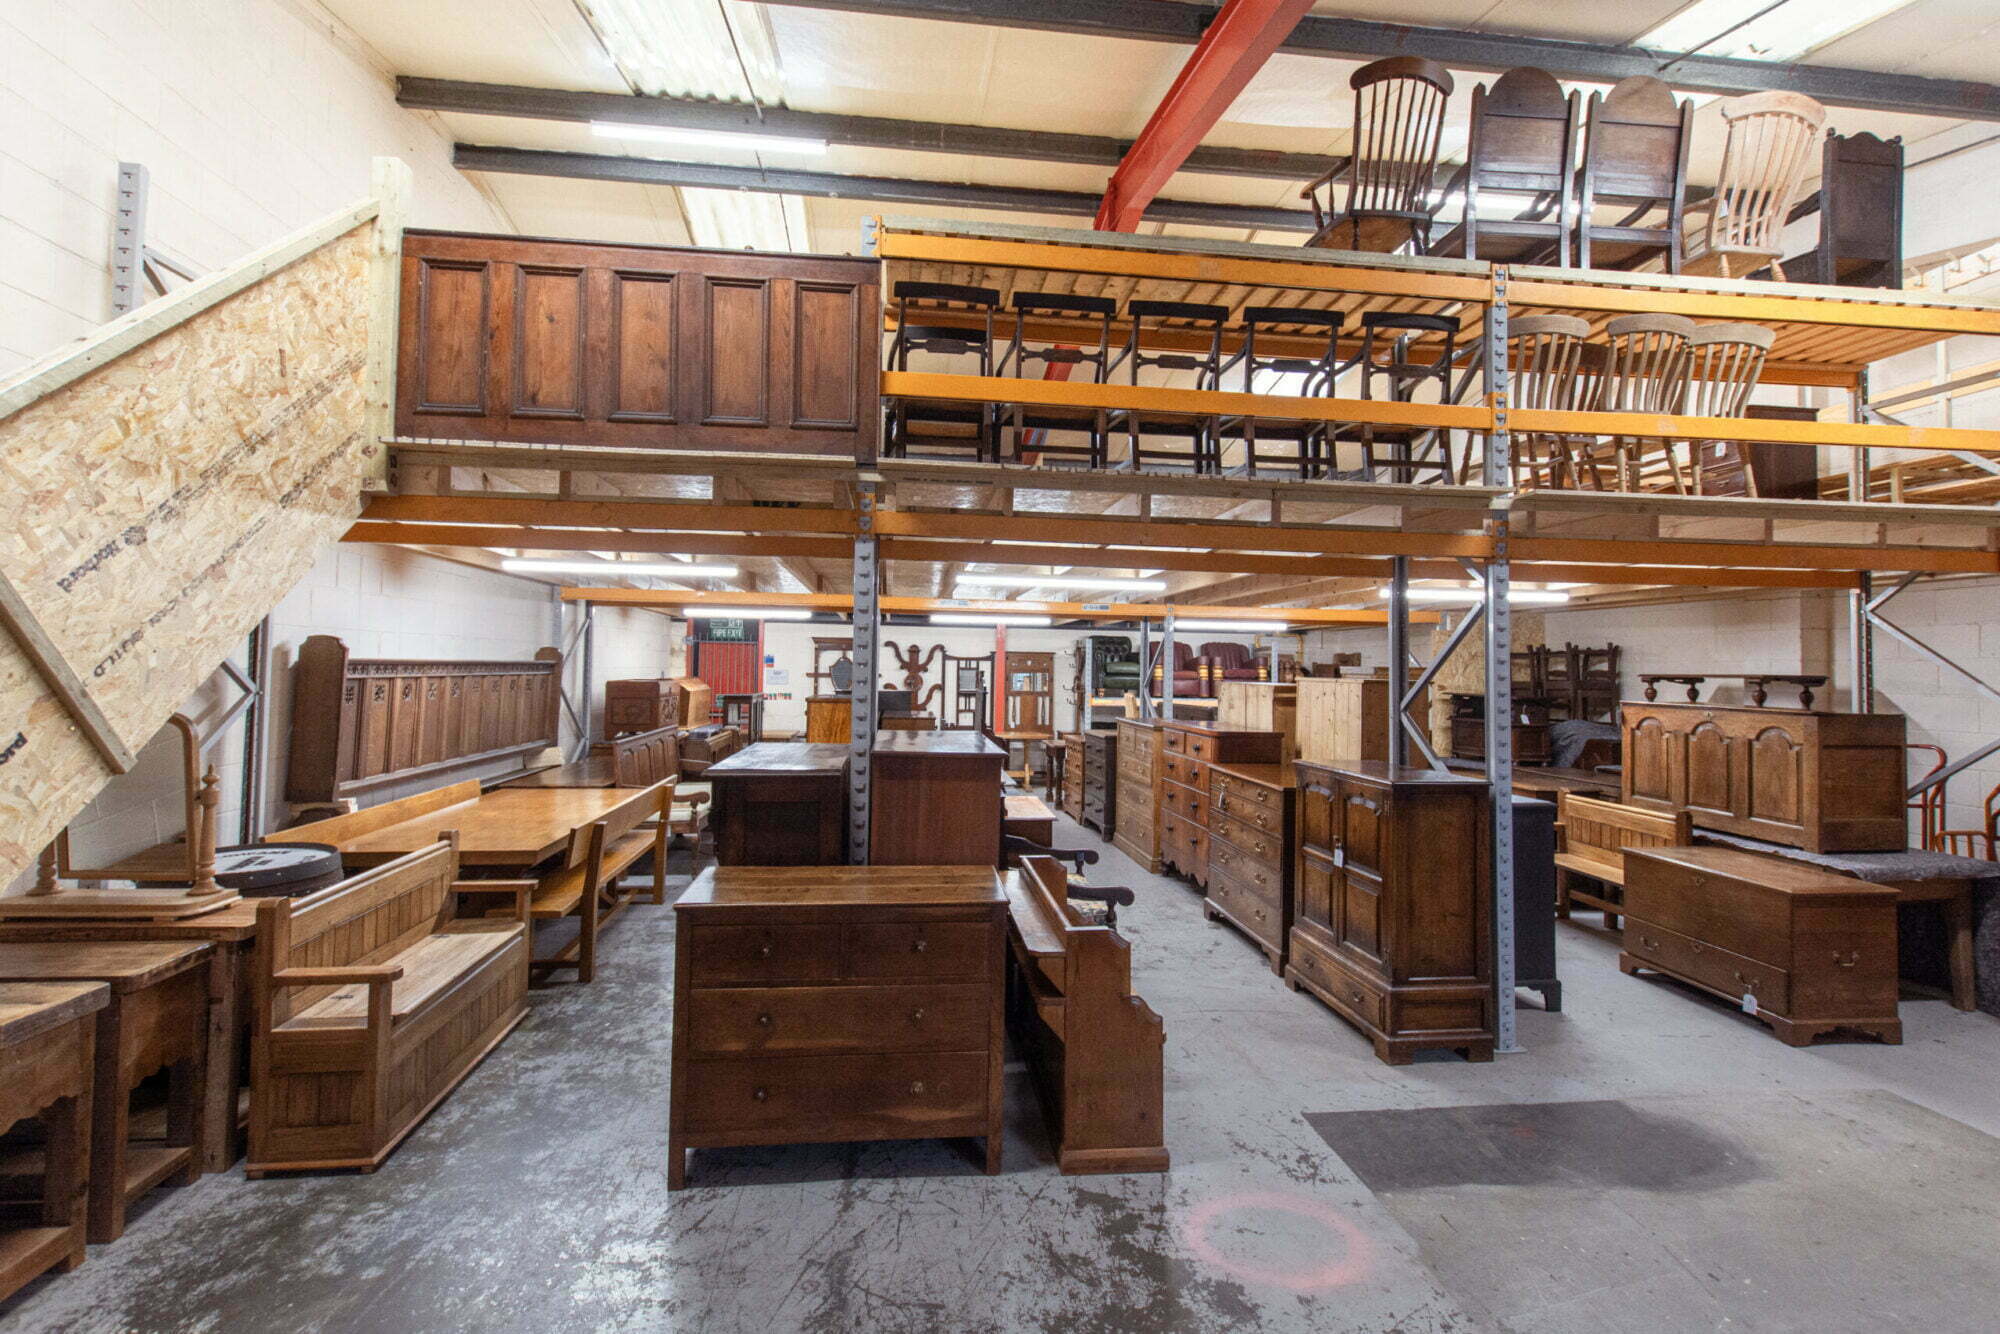 About Us, Visit our large warehouses full of antique furniture